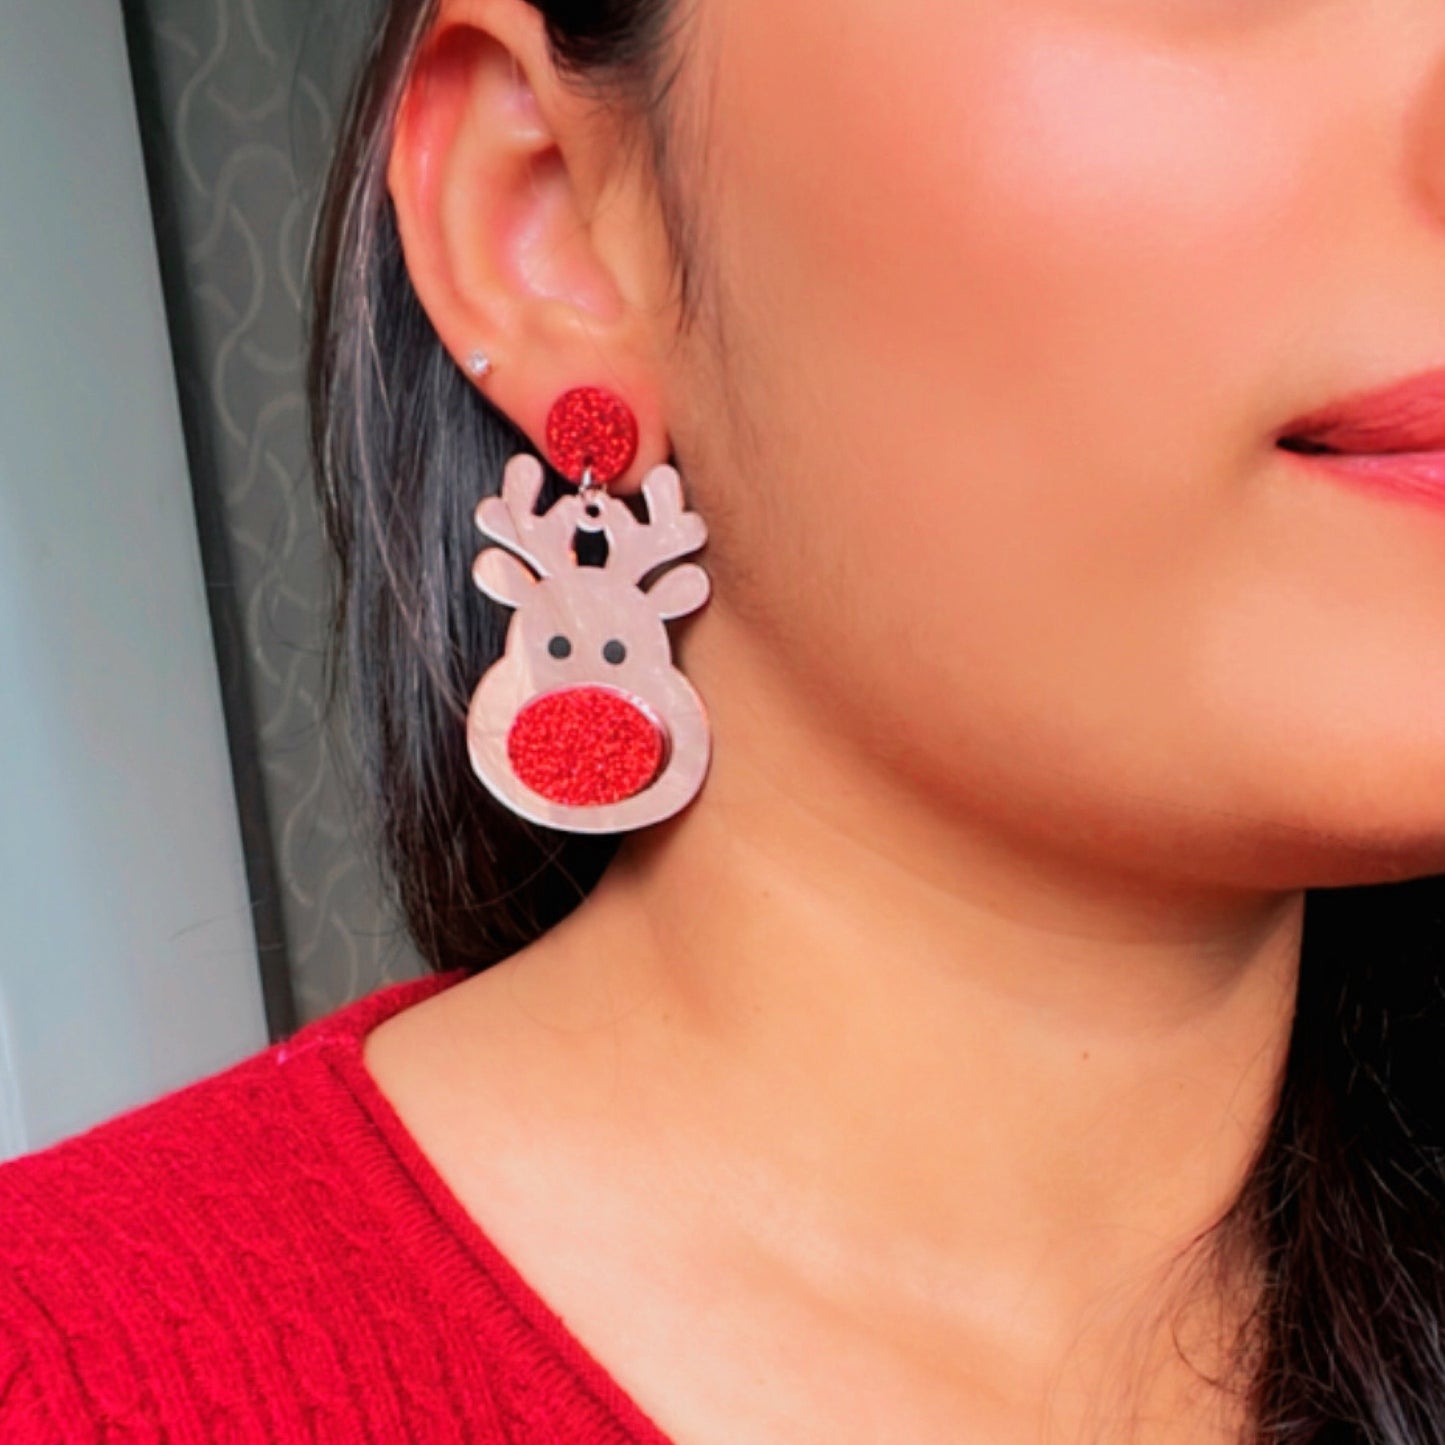 Red Rudolph Earrings - Rosegold and Red - Nian by Nidhi - worn by a woman